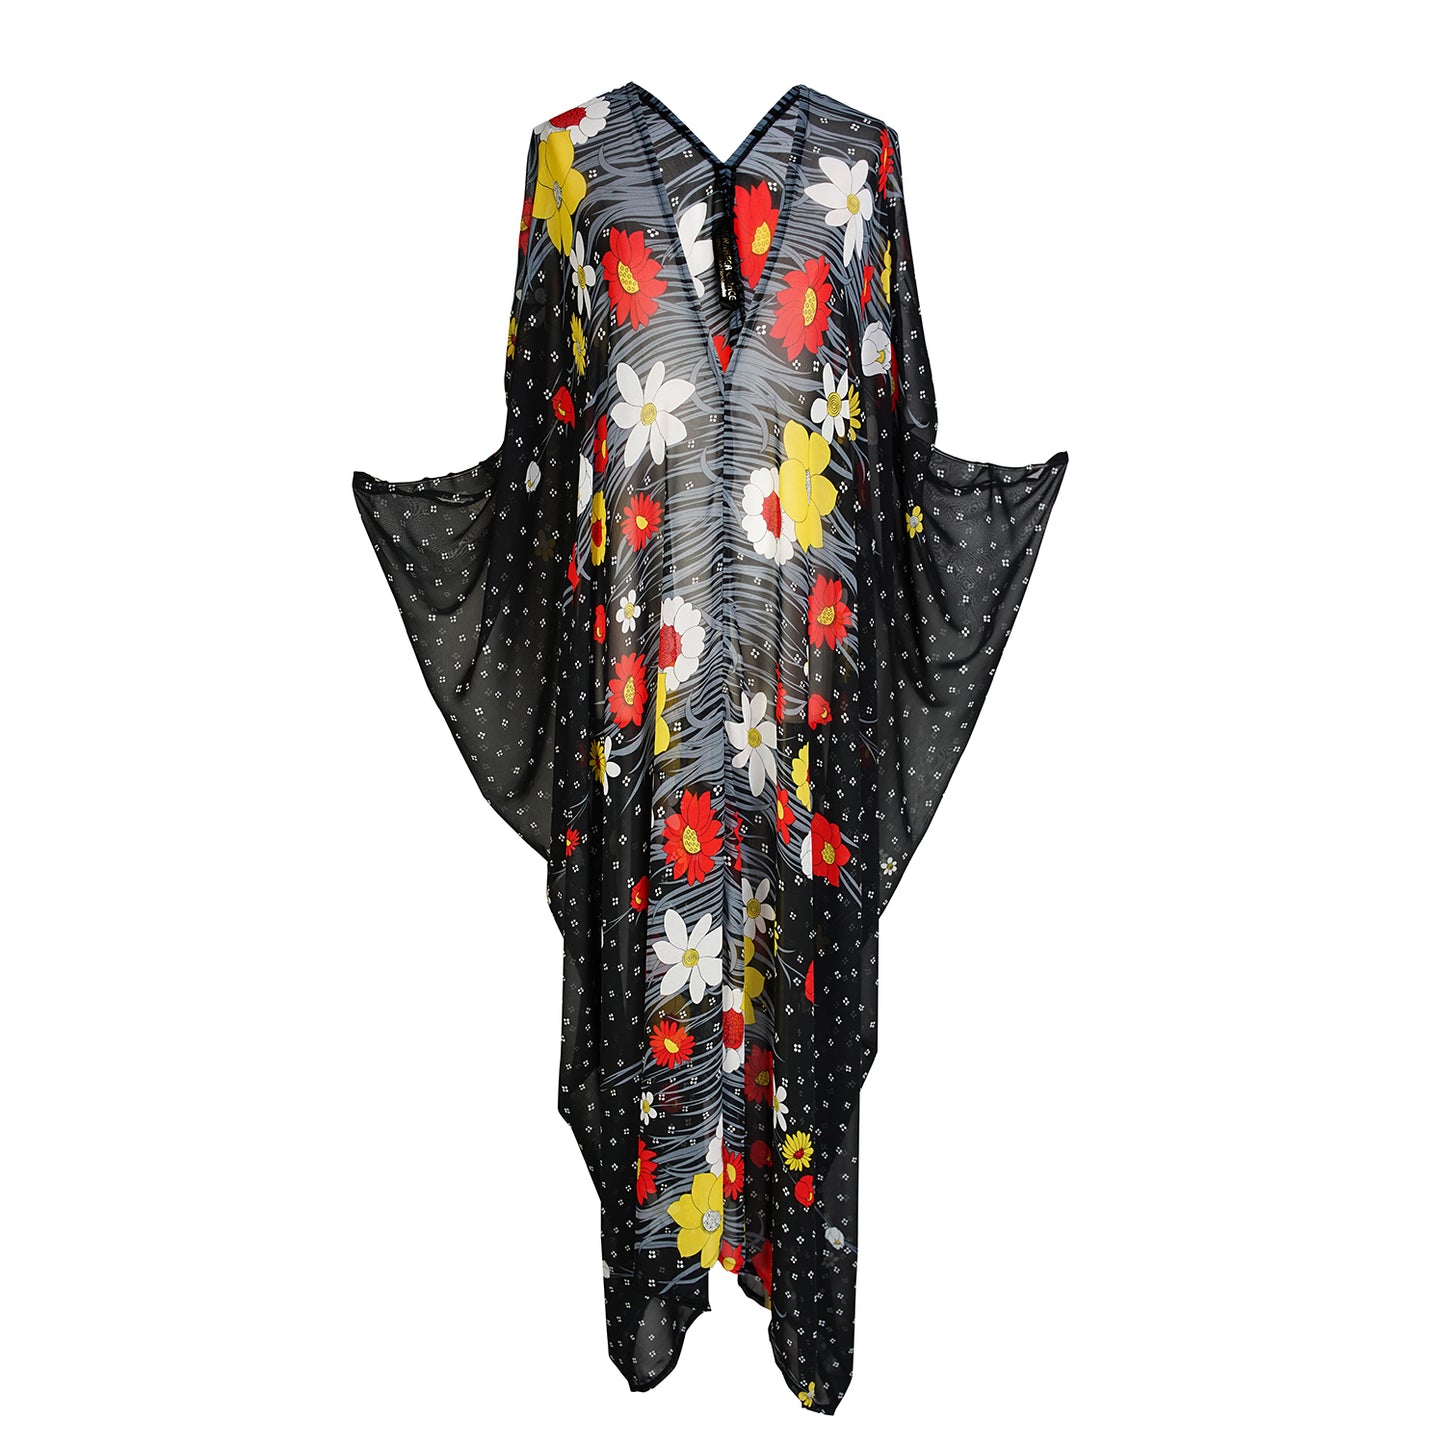 Flowy chiffon caftan with whimsical daisy print. Base color is black with a mixture of orange, white, and yellow floral patterns. Features a v-neck, batwing sleeves, and ankle hem.